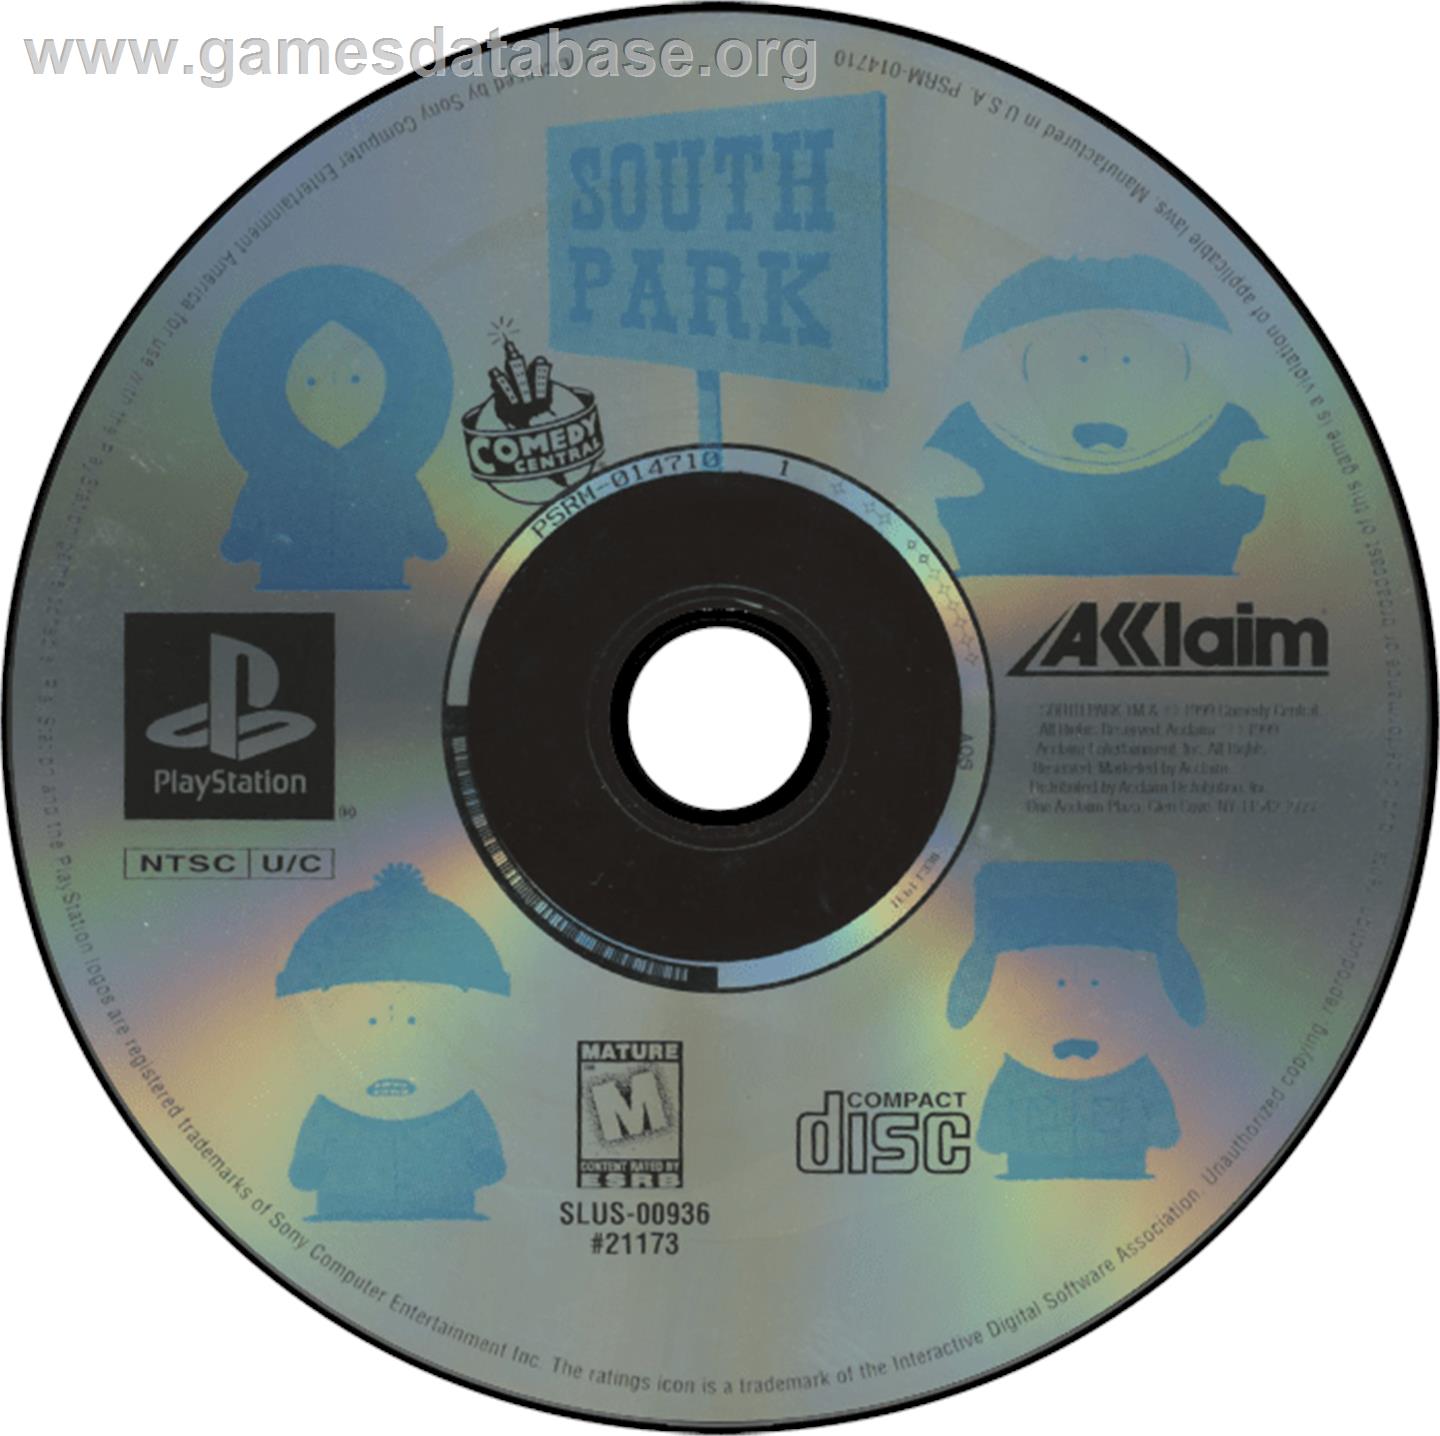 South Park: Chef's Luv Shack - Sony Playstation - Artwork - Disc